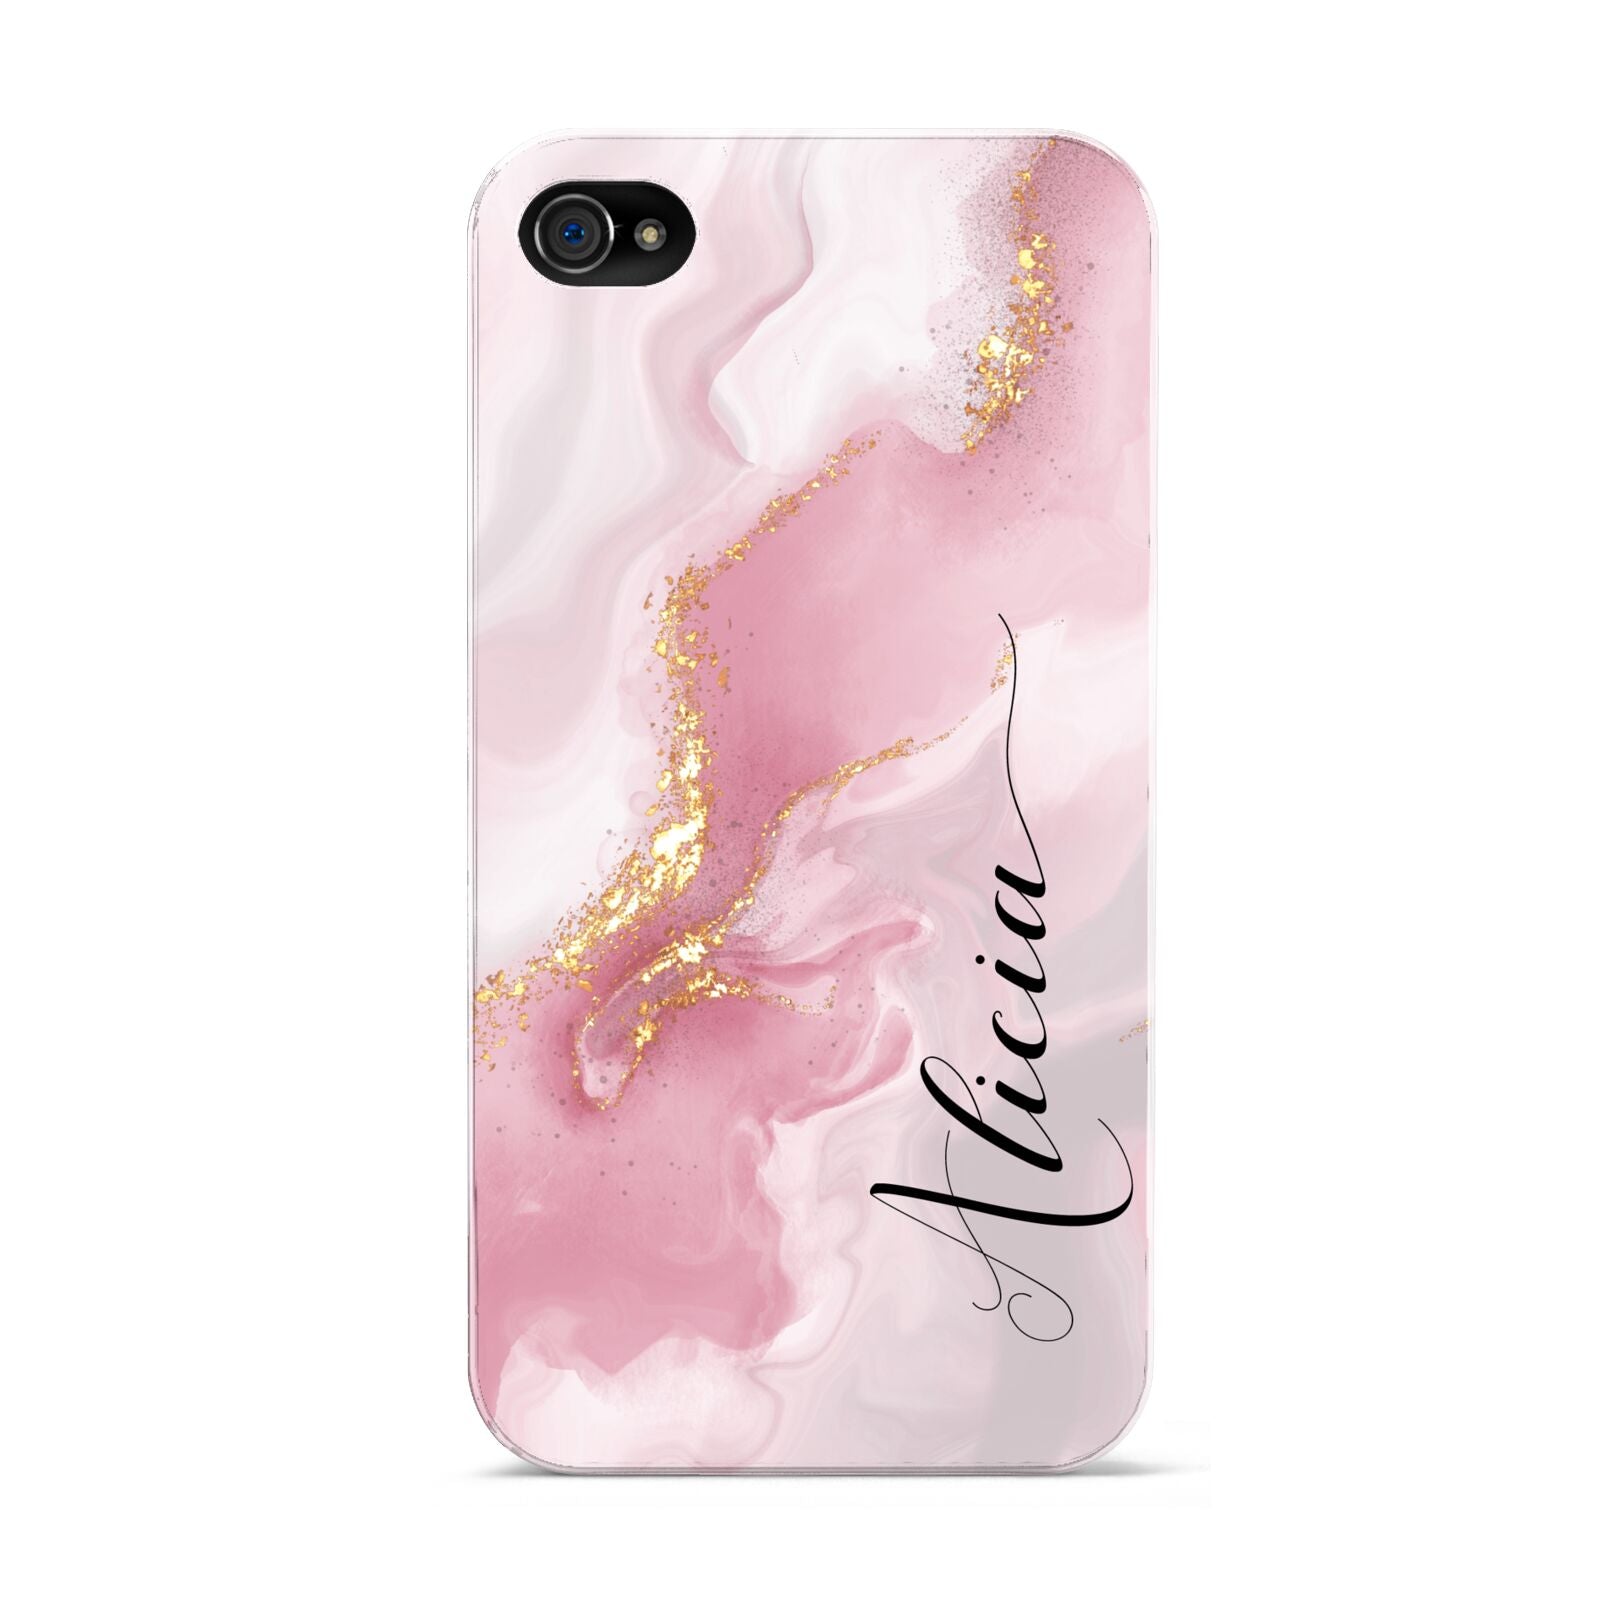 Personalised Pink Marble Apple iPhone 4s Case